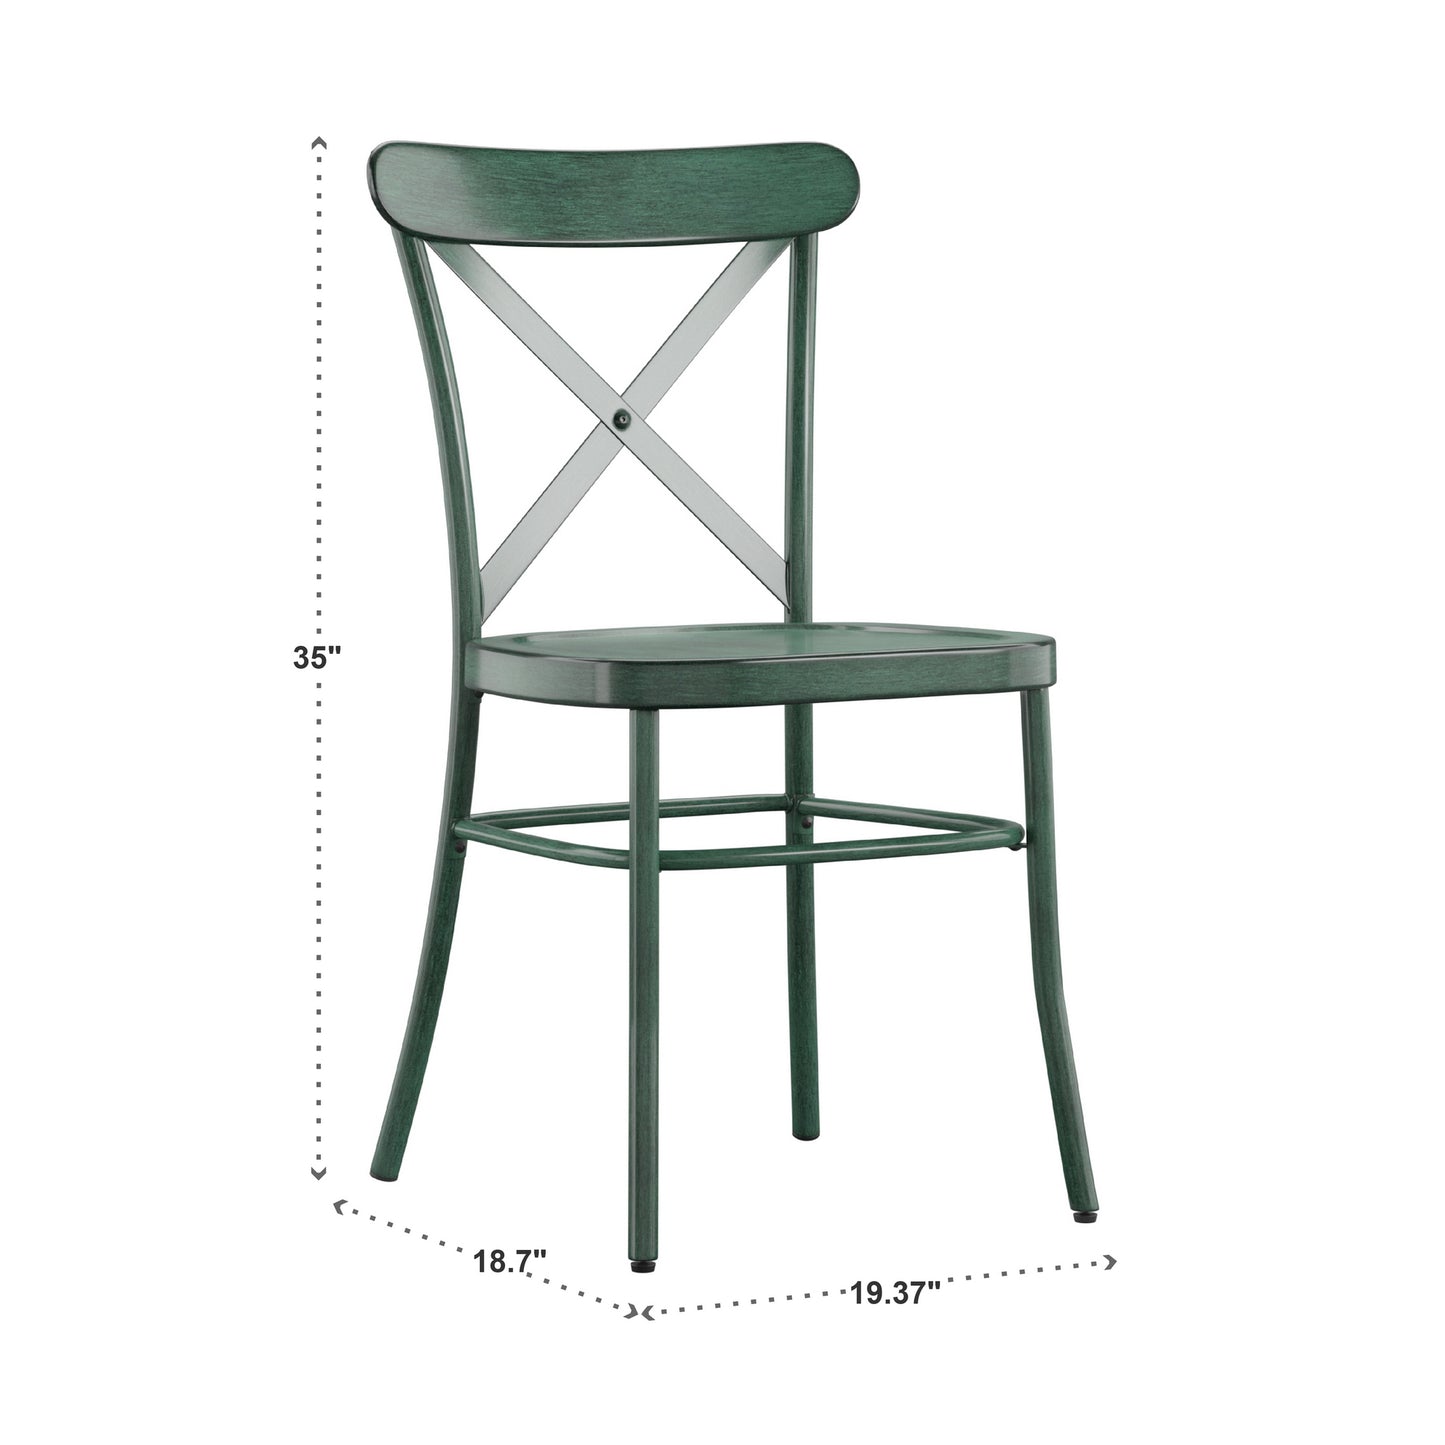 Metal Dining Chairs (Set of 2) - Antique Sage Green